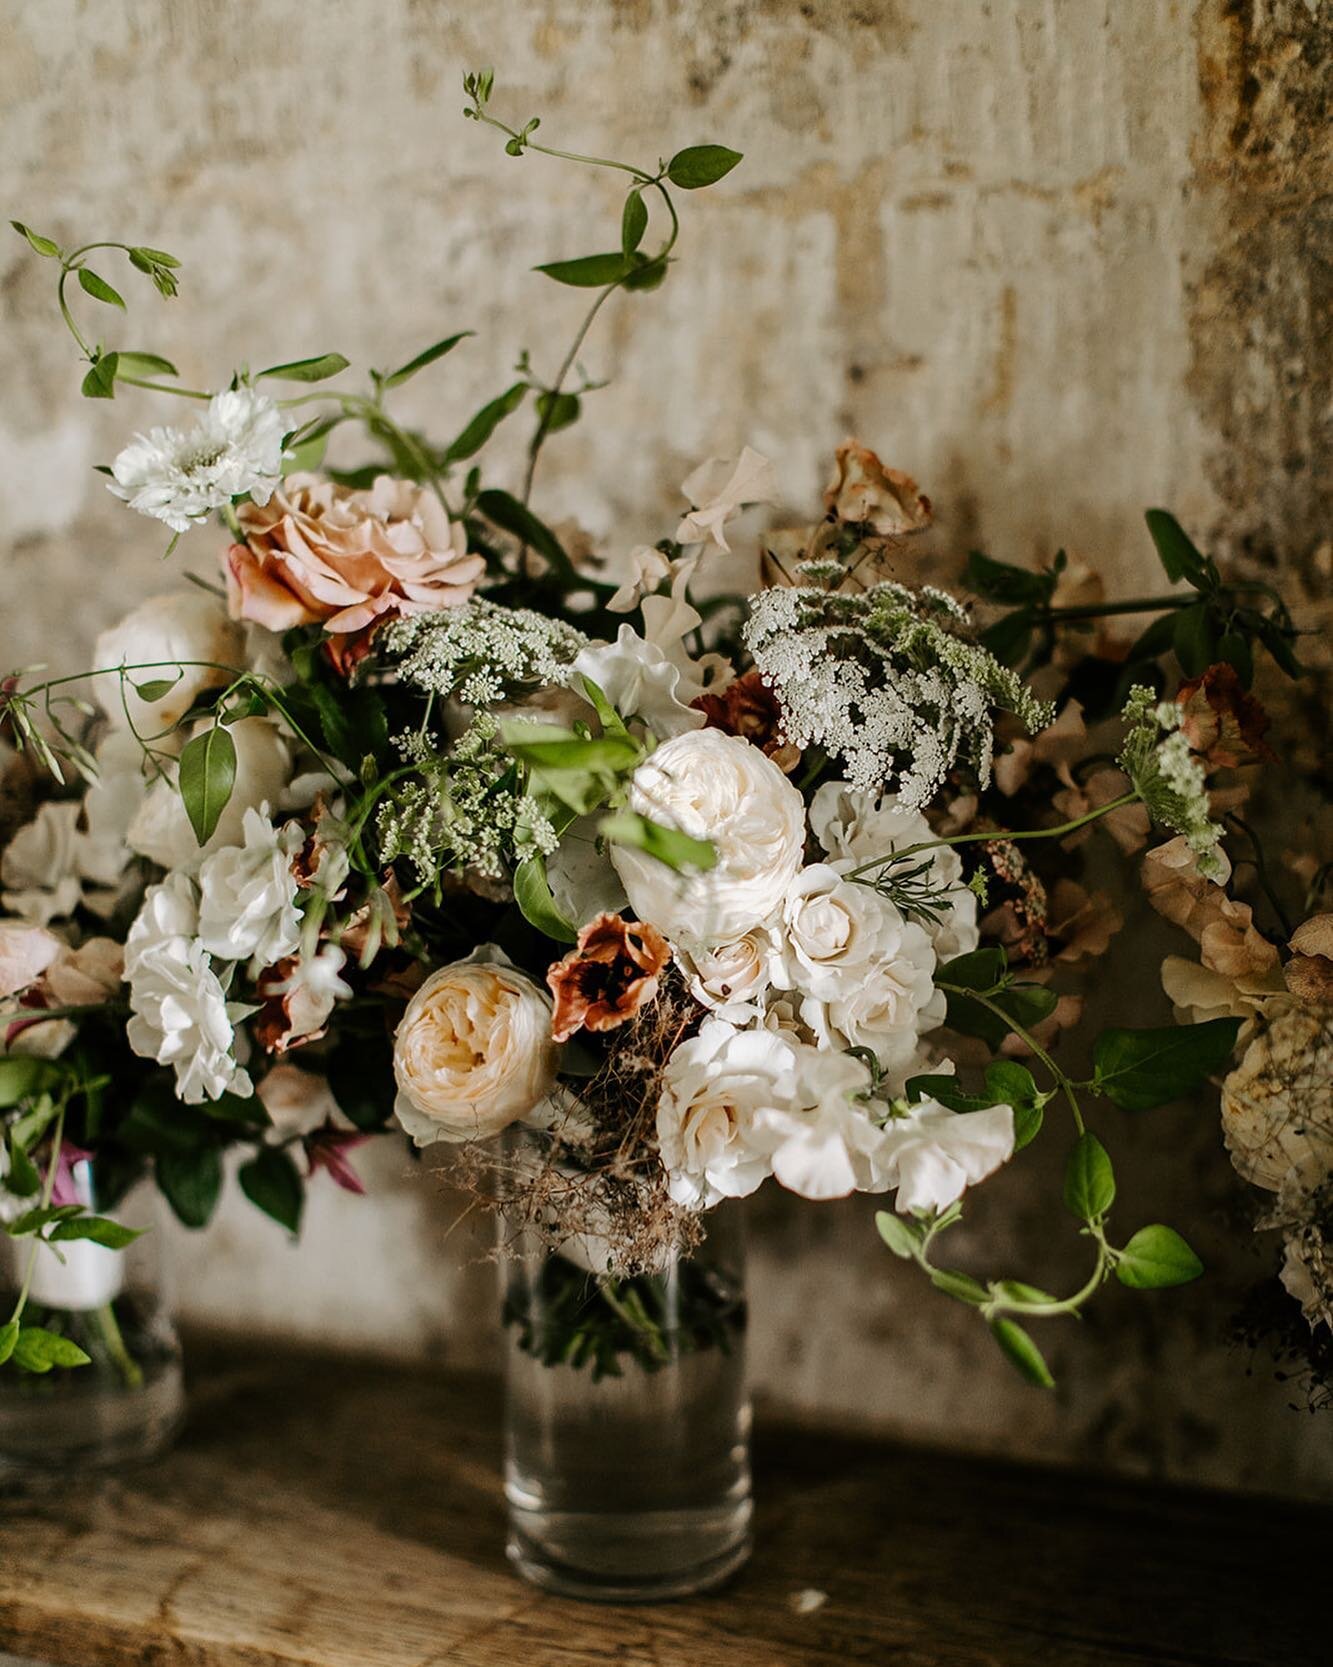 Beautiful Briana's bouquet, captured by @greenantlers.co.